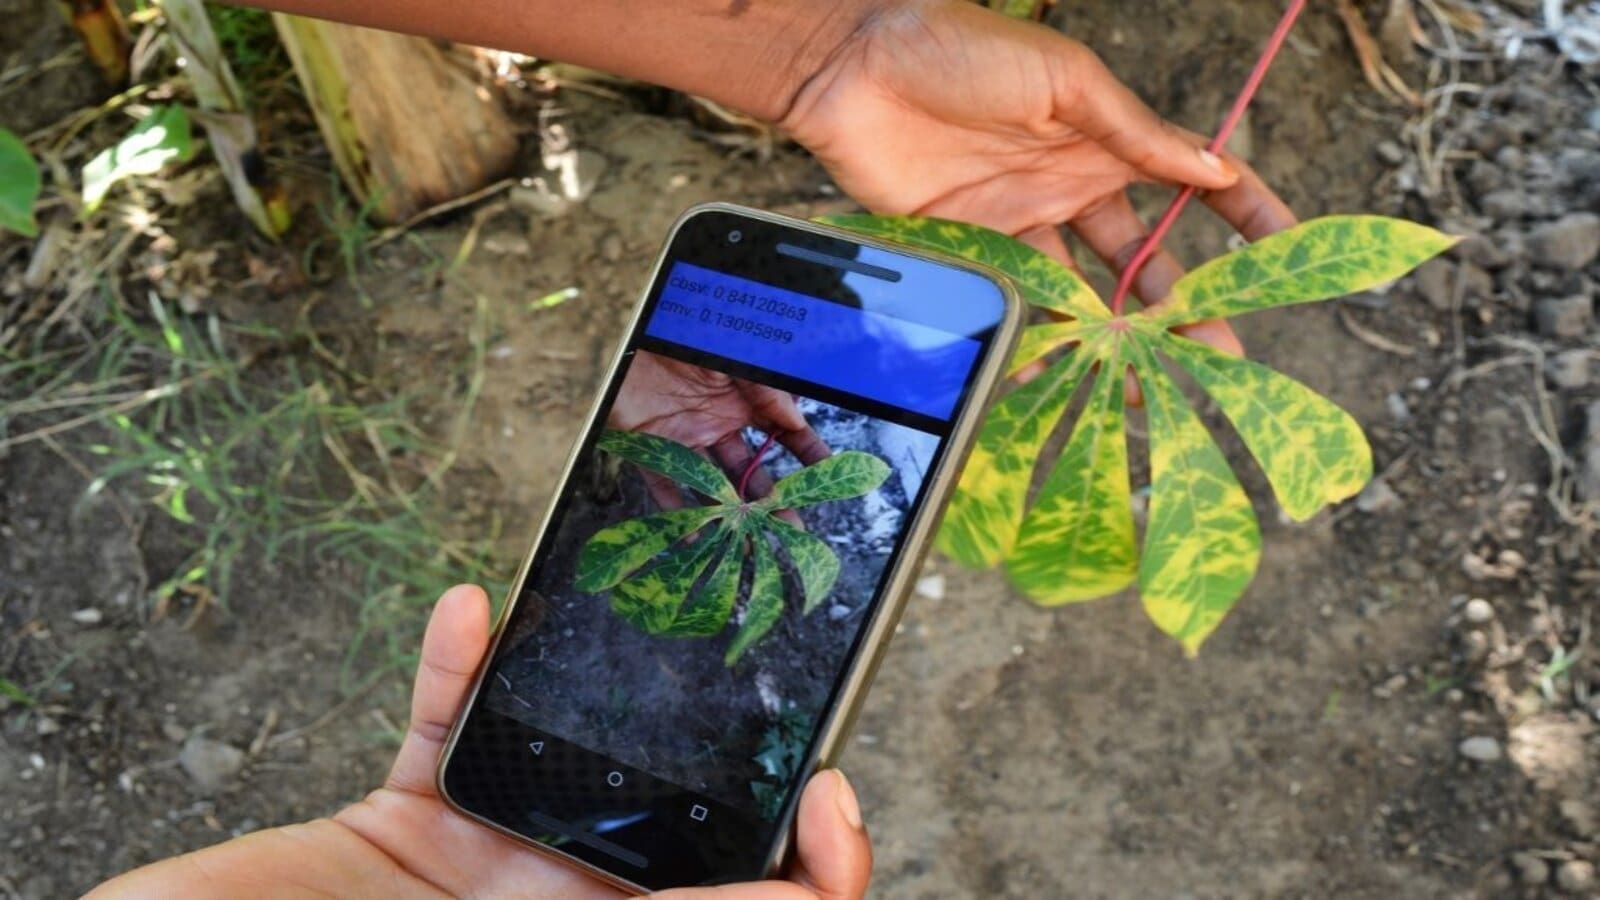 Cassava production in Tanzania to remain afloat following the success of an AI app for early detection of diseases